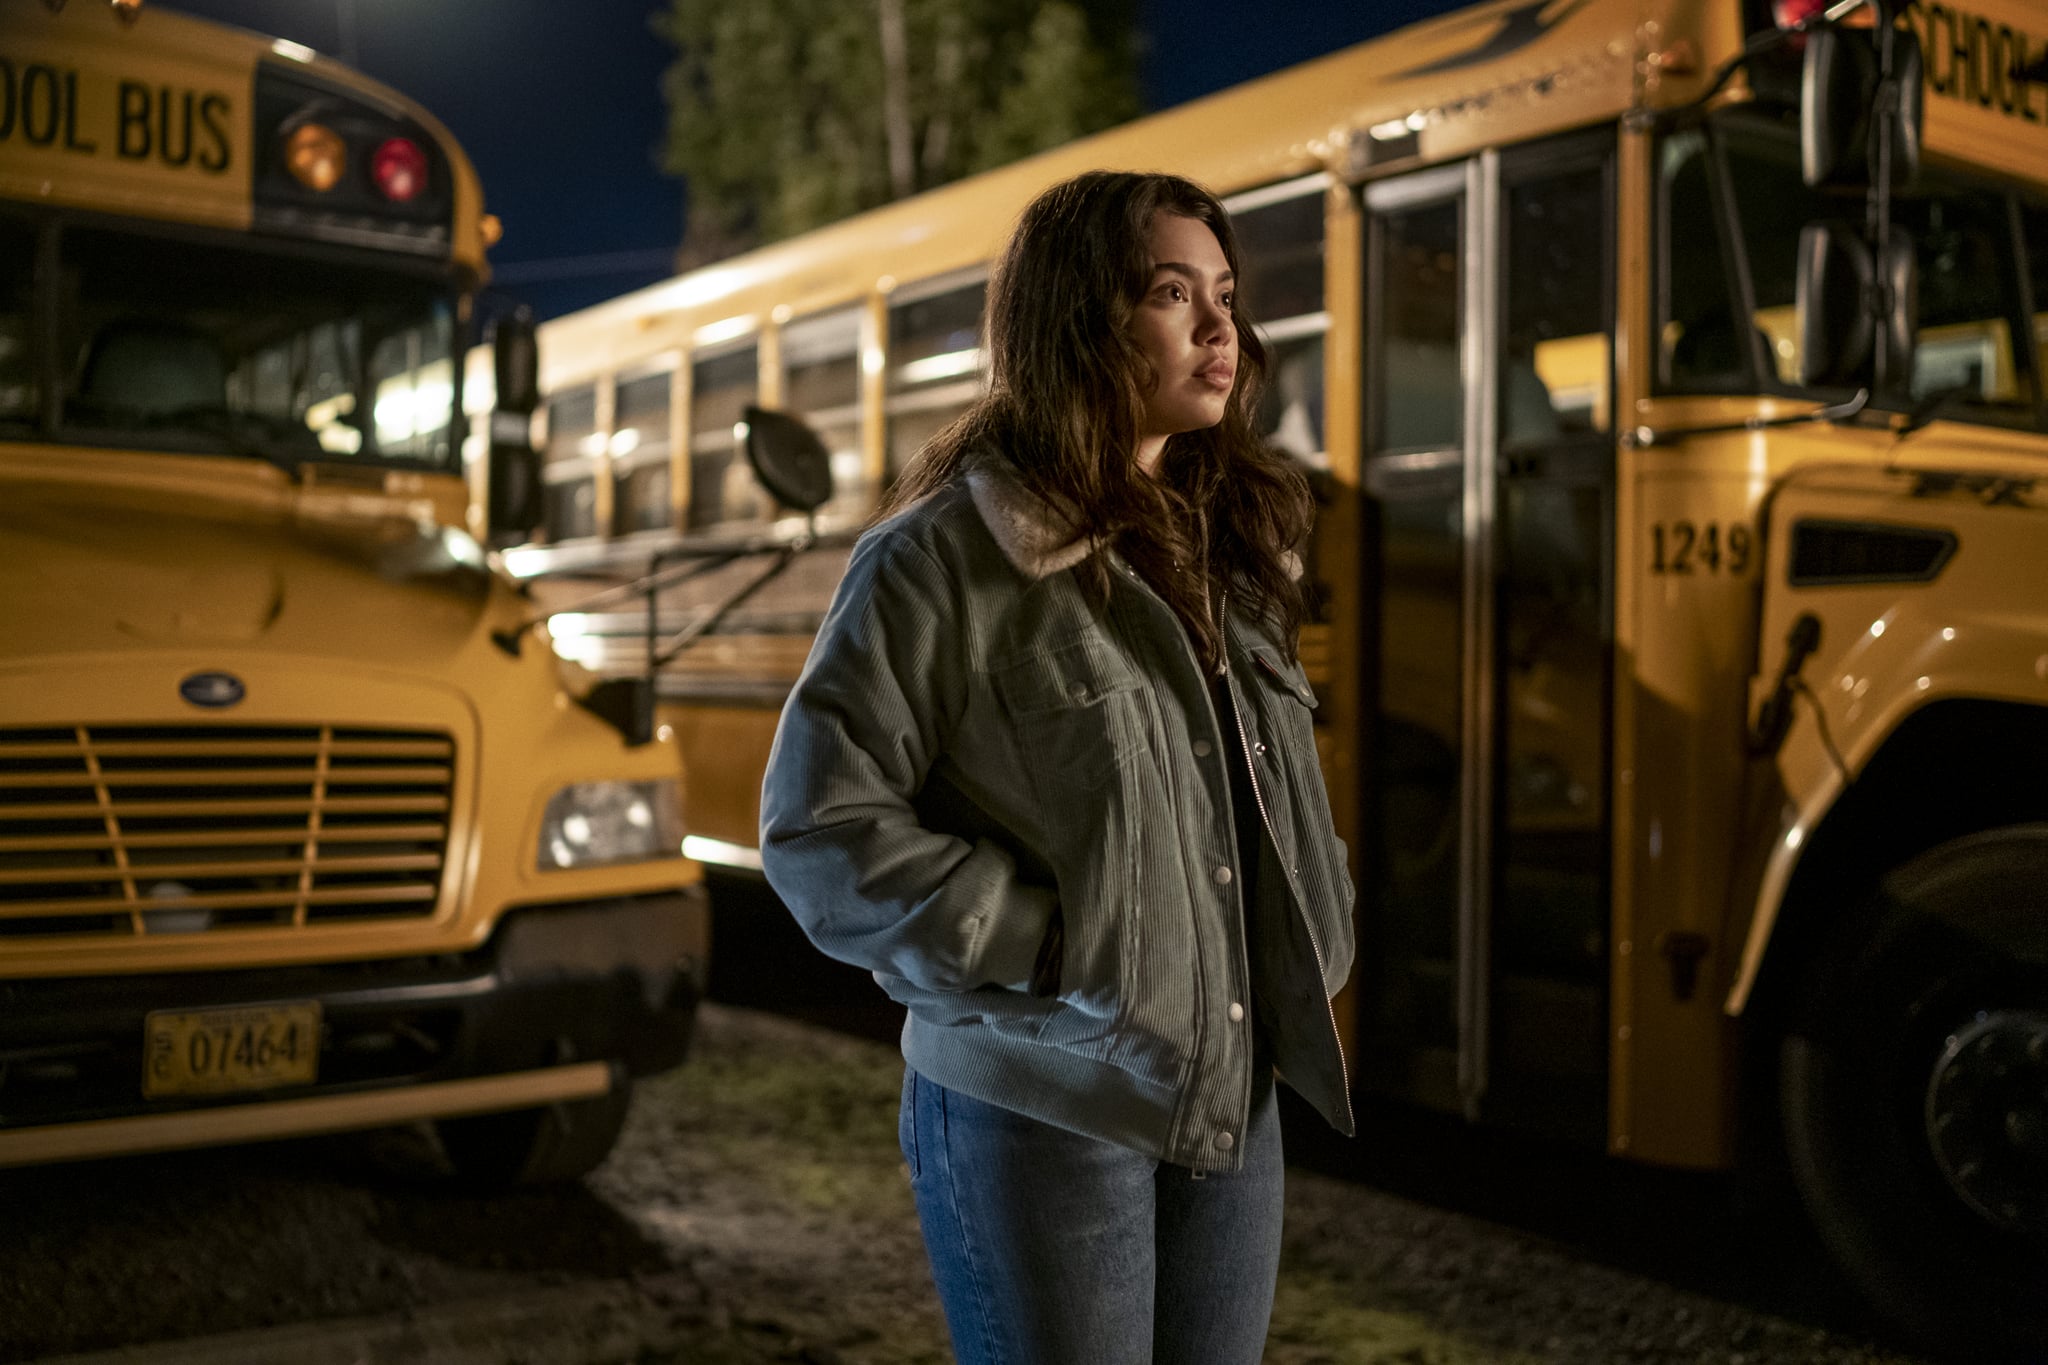 This image is of Amber living in a school bus